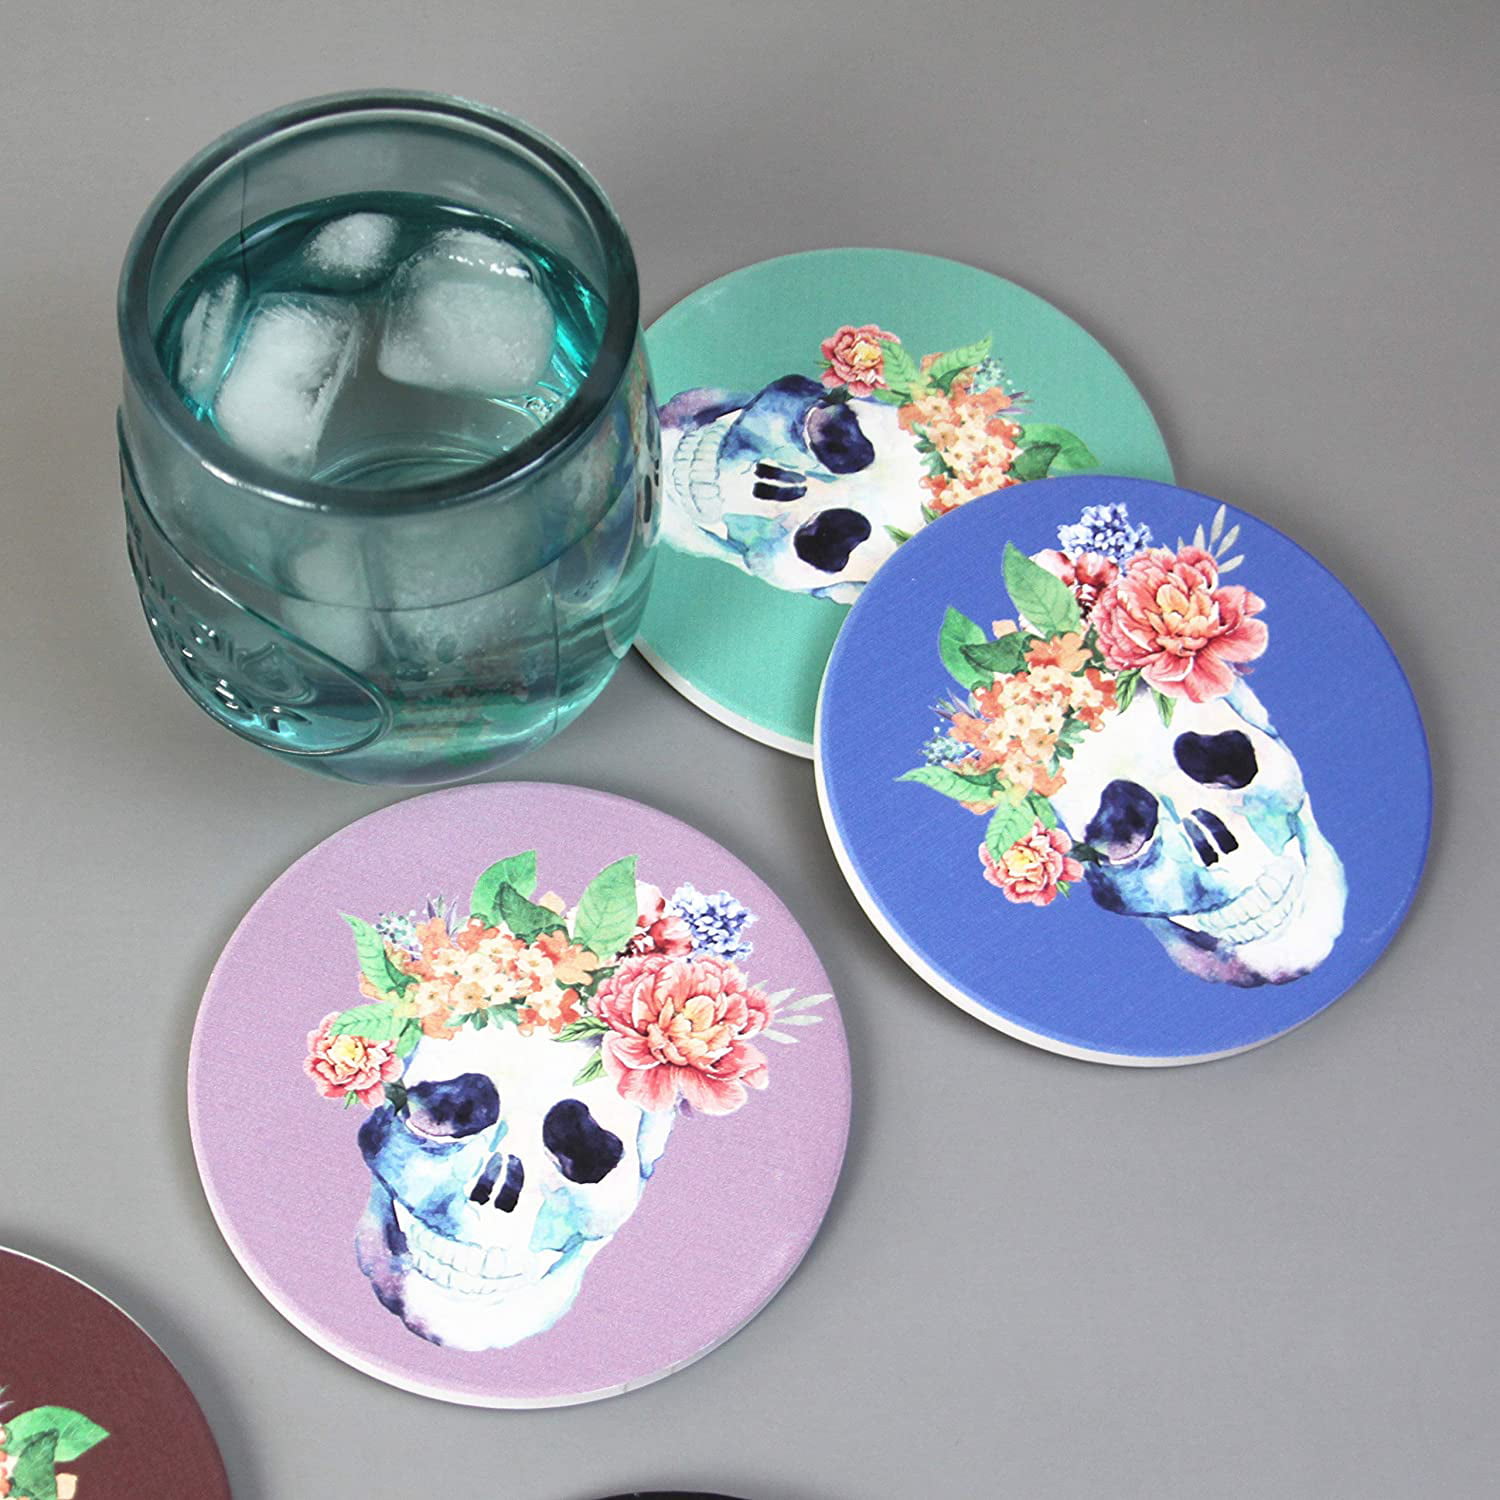 6 Pack Navy Coasters in Holder Plus 6 Absorbent Sugar Skull Cup Mats with Cork Backing Blue Coaster Set & Ceramic Coasters Bundle